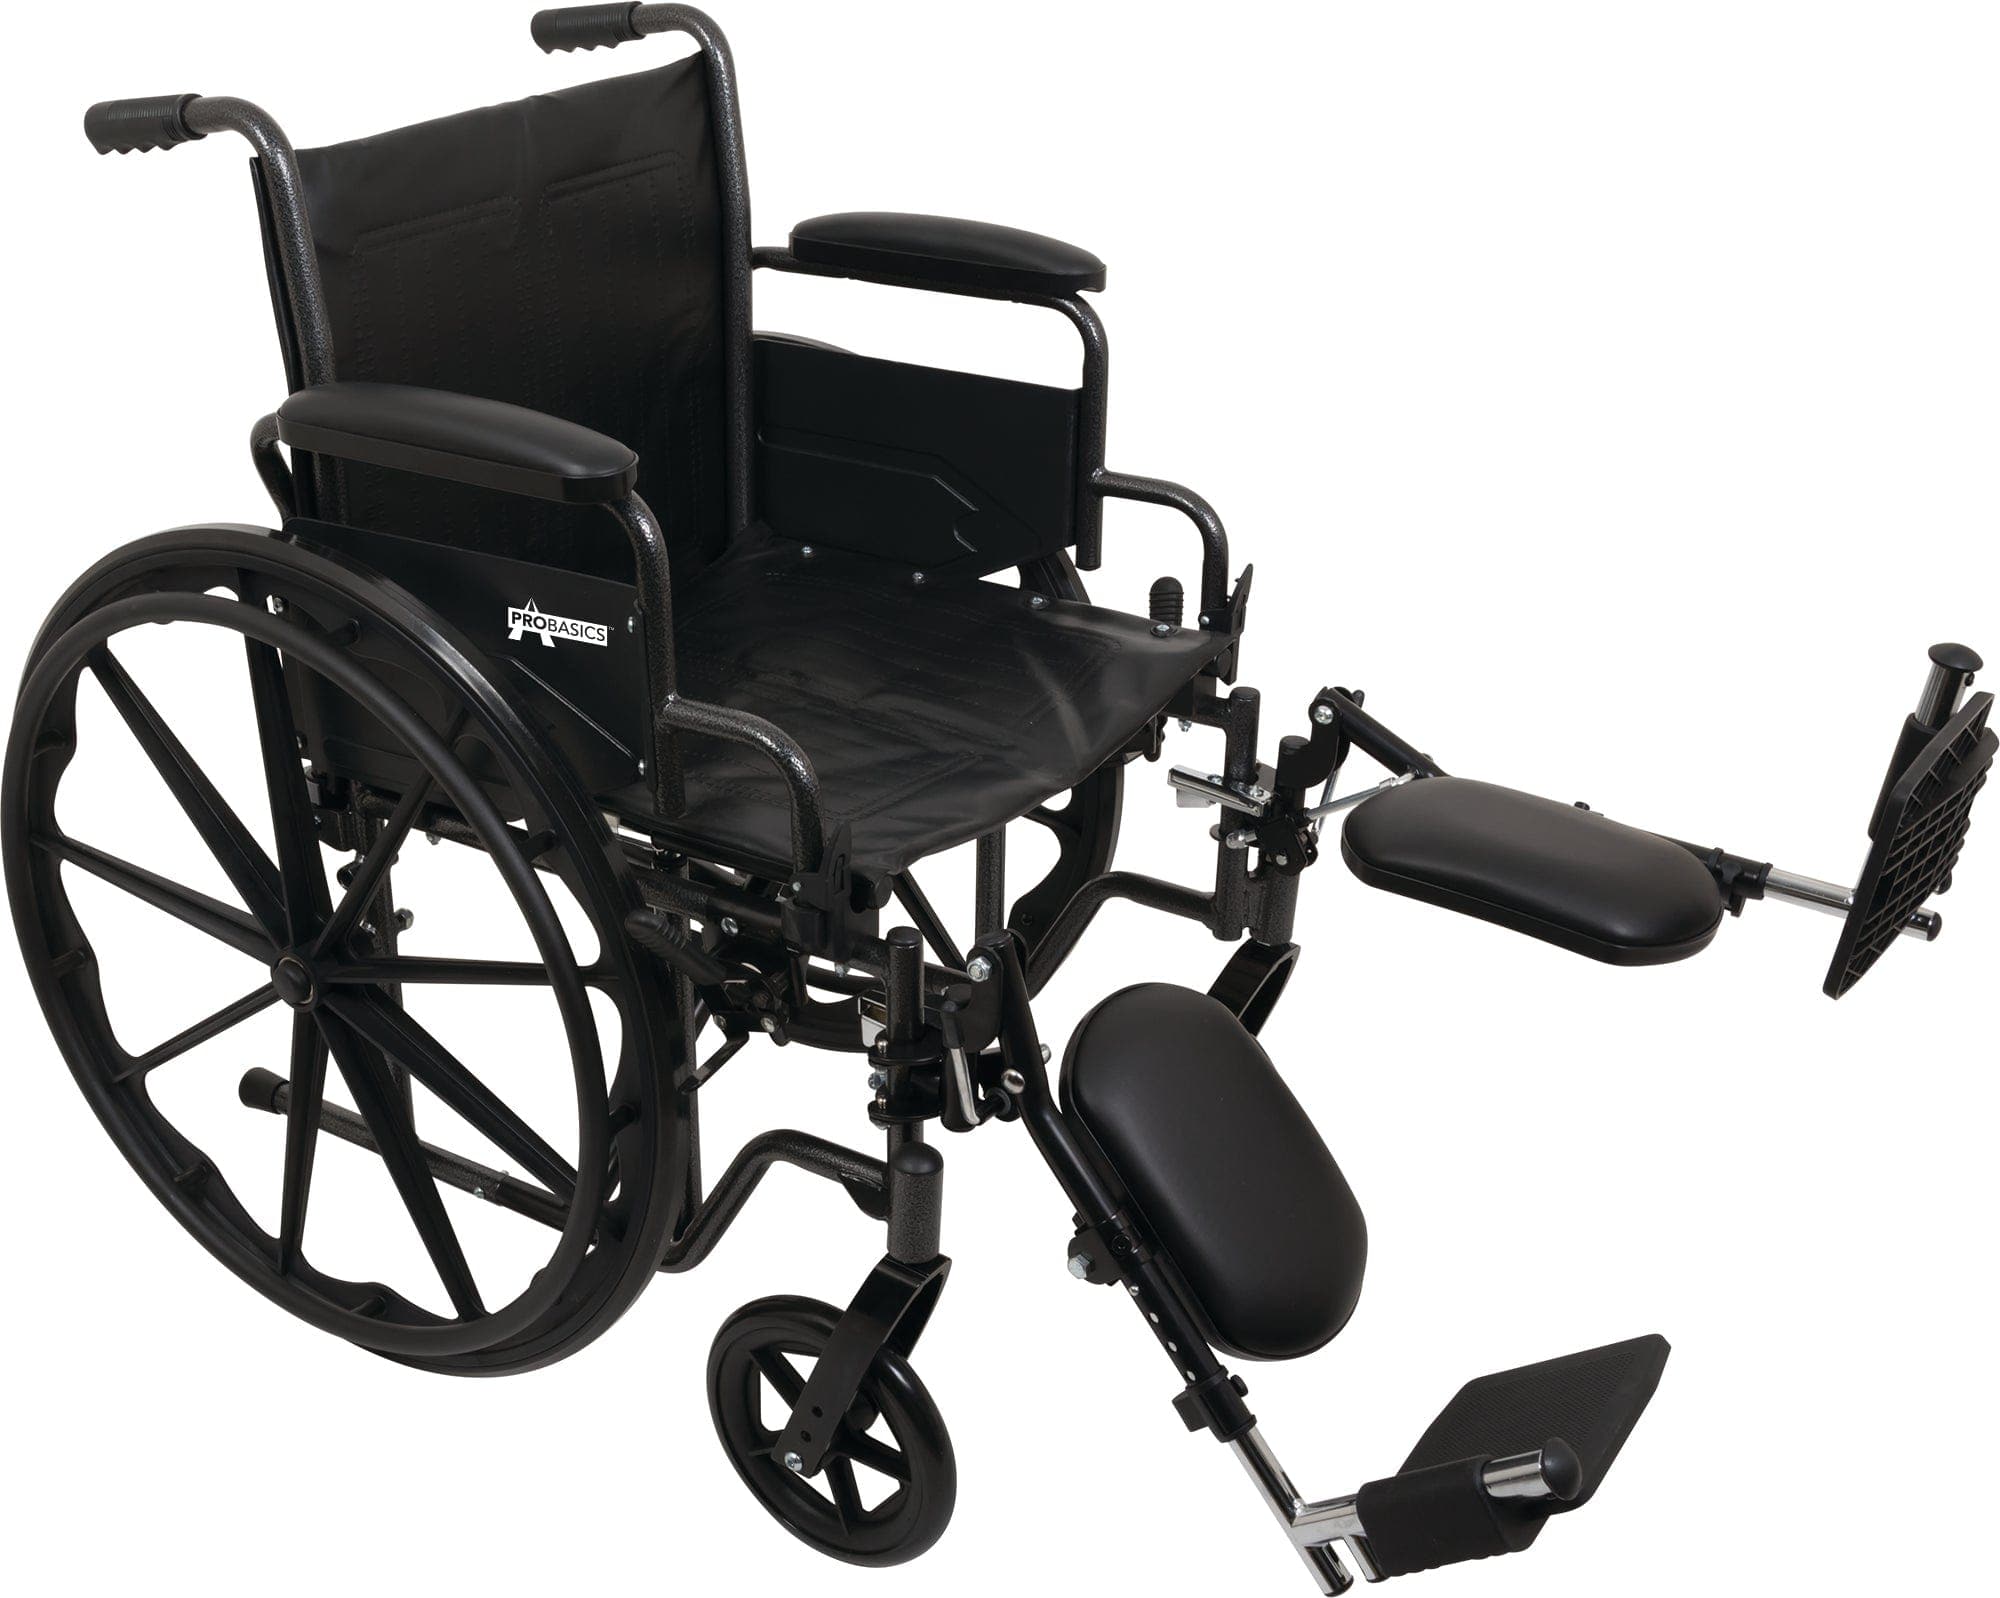 Compass Health K2 Wheelchairs Compass Health ProBasics K2 Wheelchair with 20" x 16" Seat and Elevating Legrests